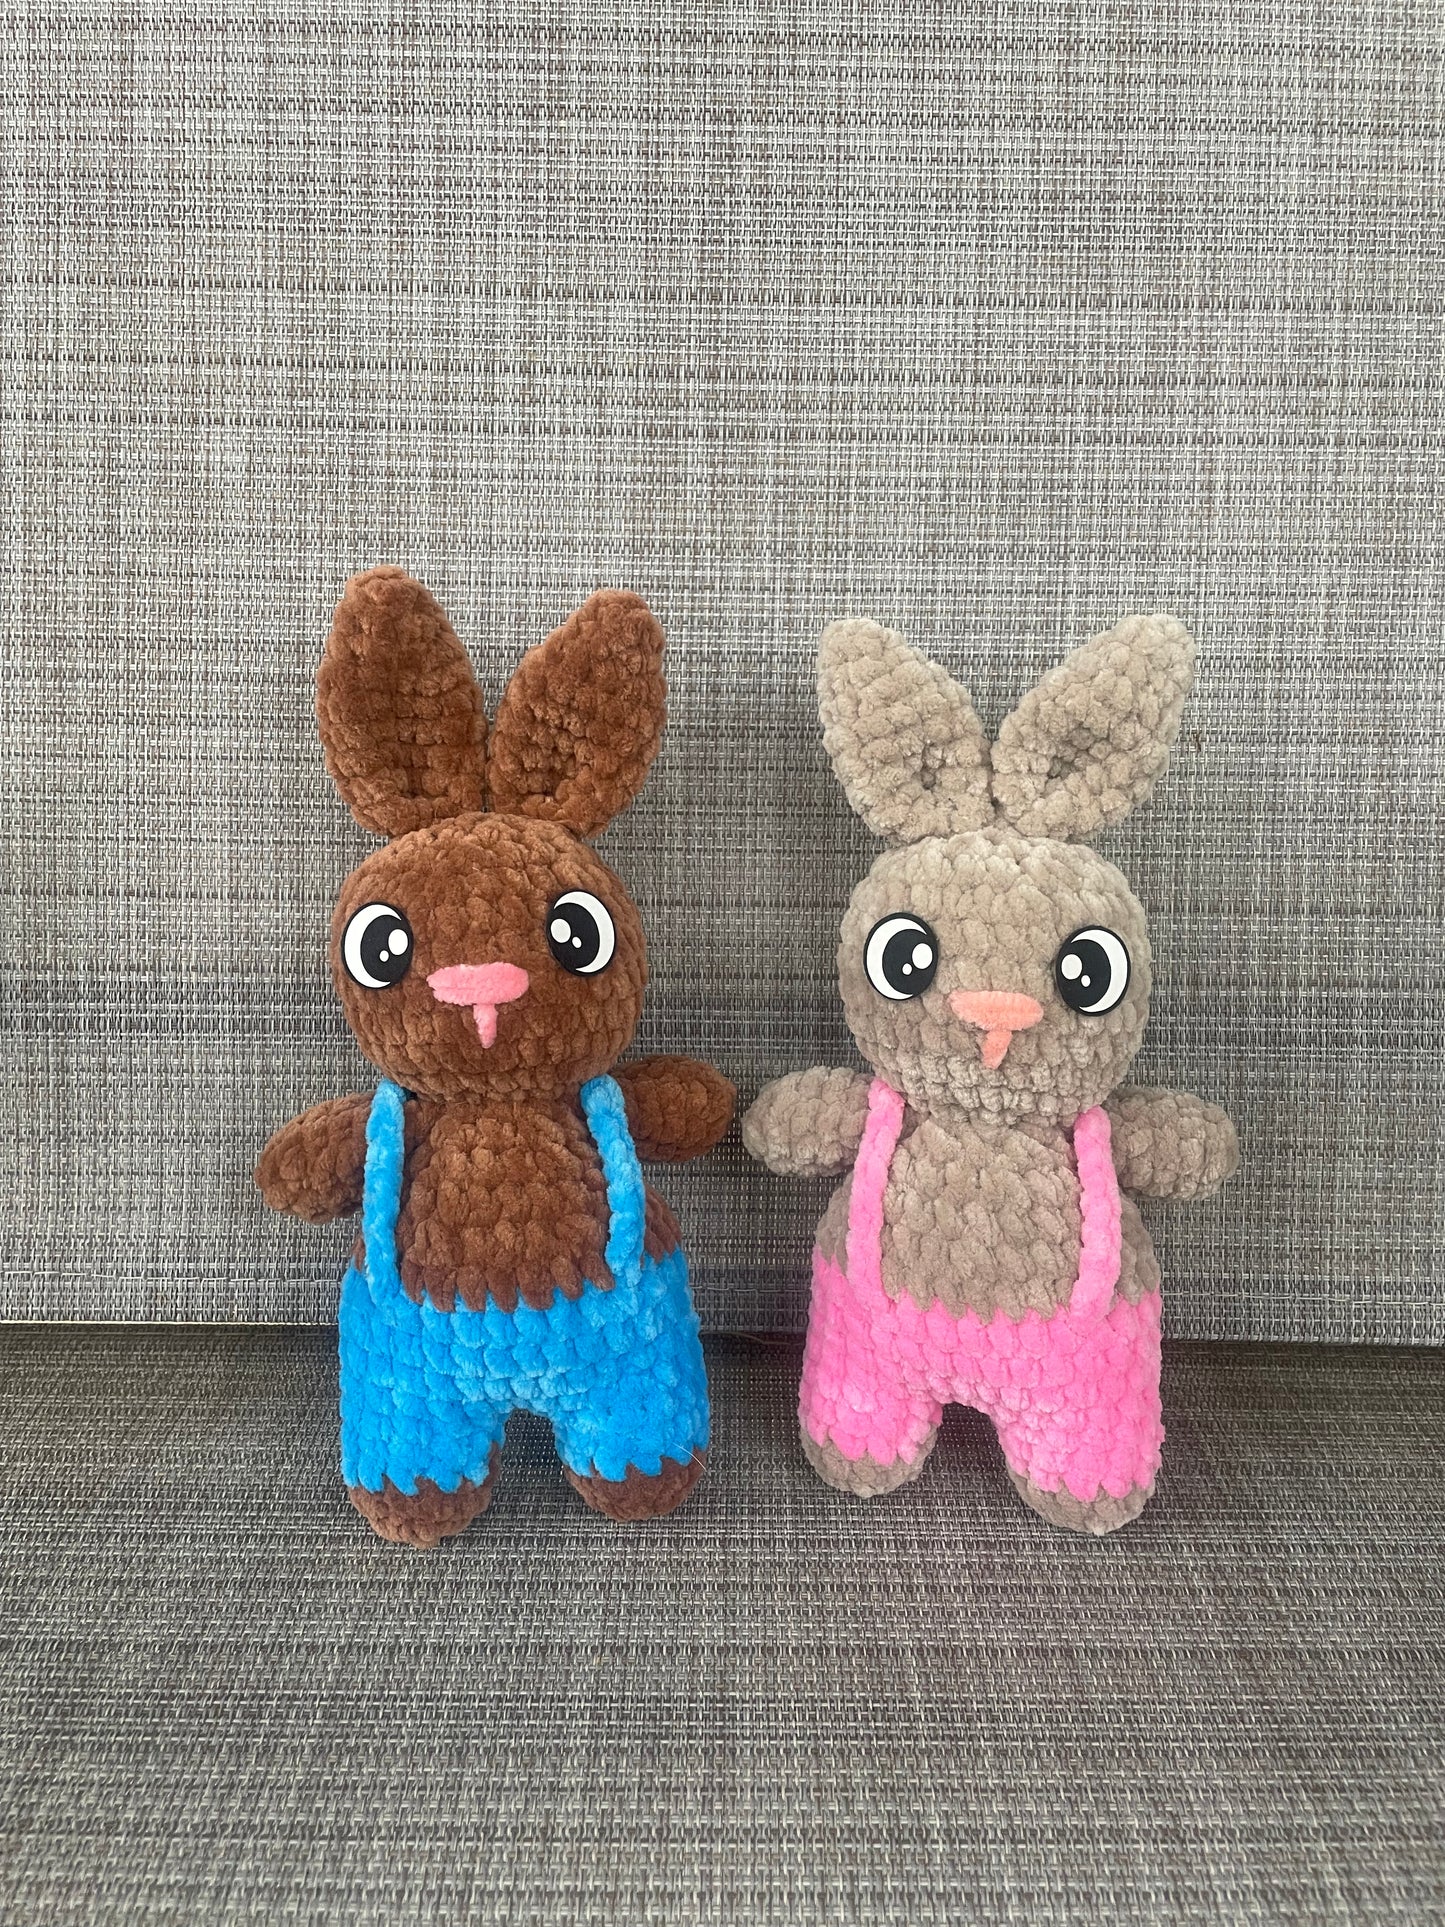 Bunnies with overalls